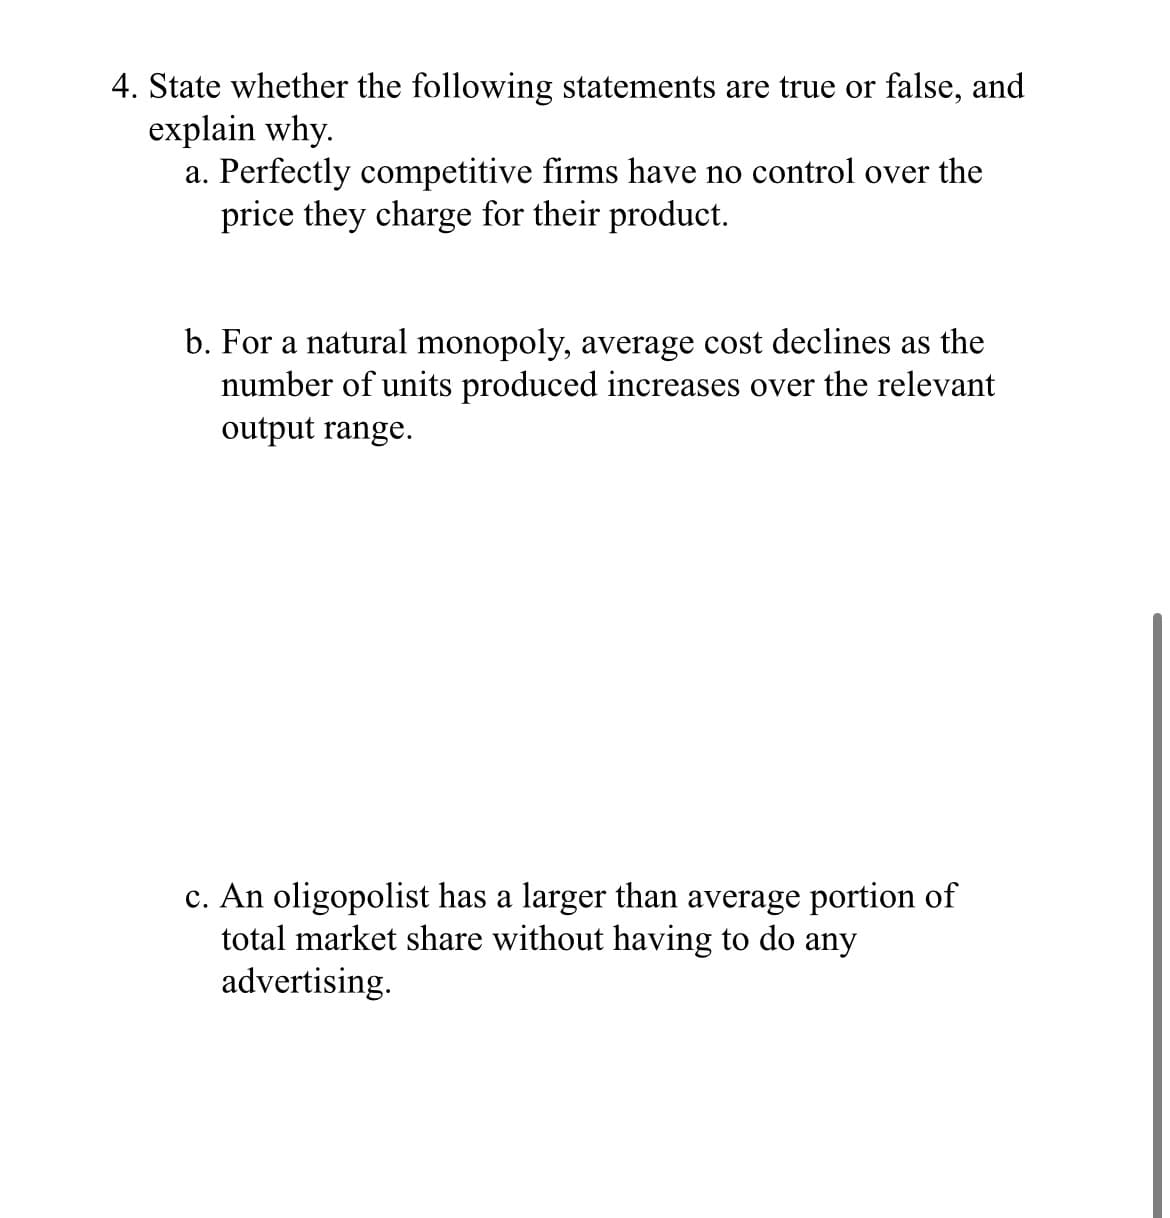 State whether the following statements are true or false, and
explain why.
a. Perfectly competitive firms have no control over the
price they charge for their product.
b. For a natural monopoly, average cost declines as the
number of units produced increases over the relevant
output range.
c. An oligopolist has a larger than average portion of
total market share without having to do any
advertising.
